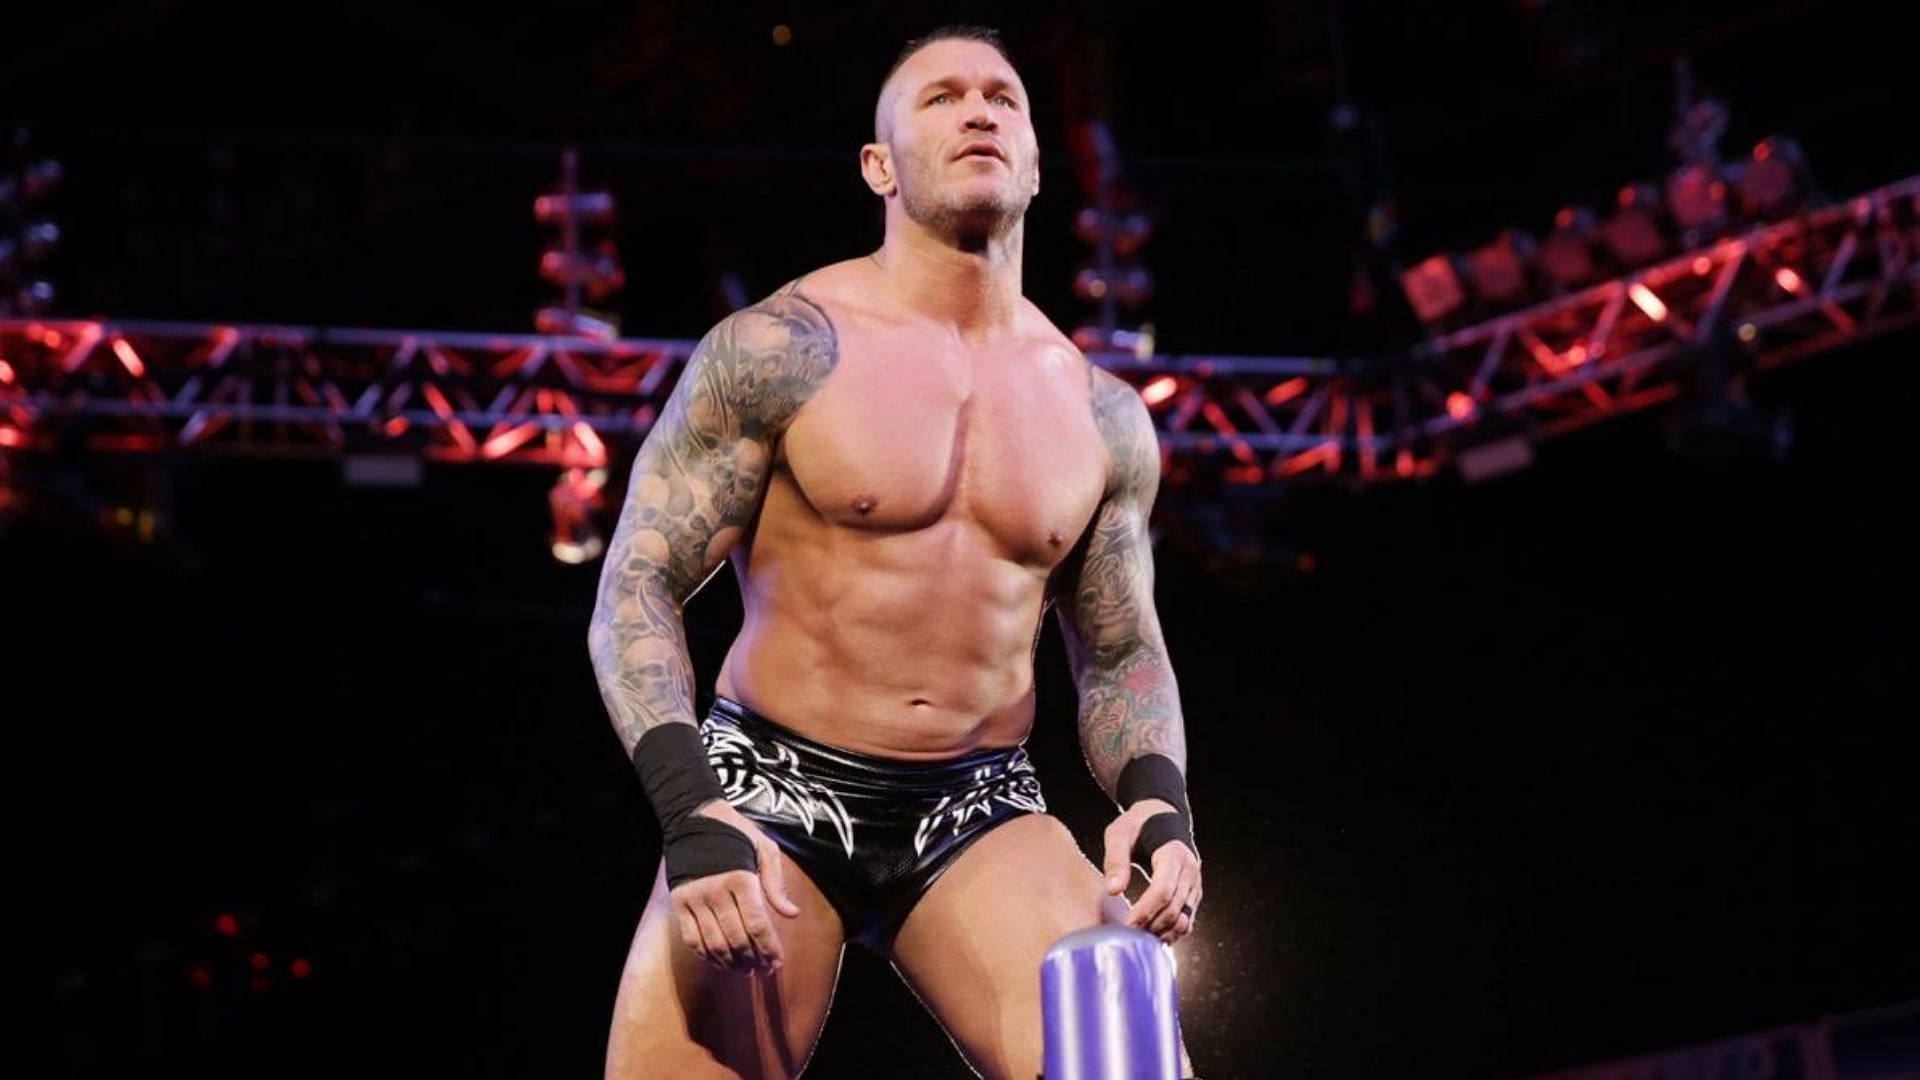 Who is the next opponent for Randy Orton in WWE?